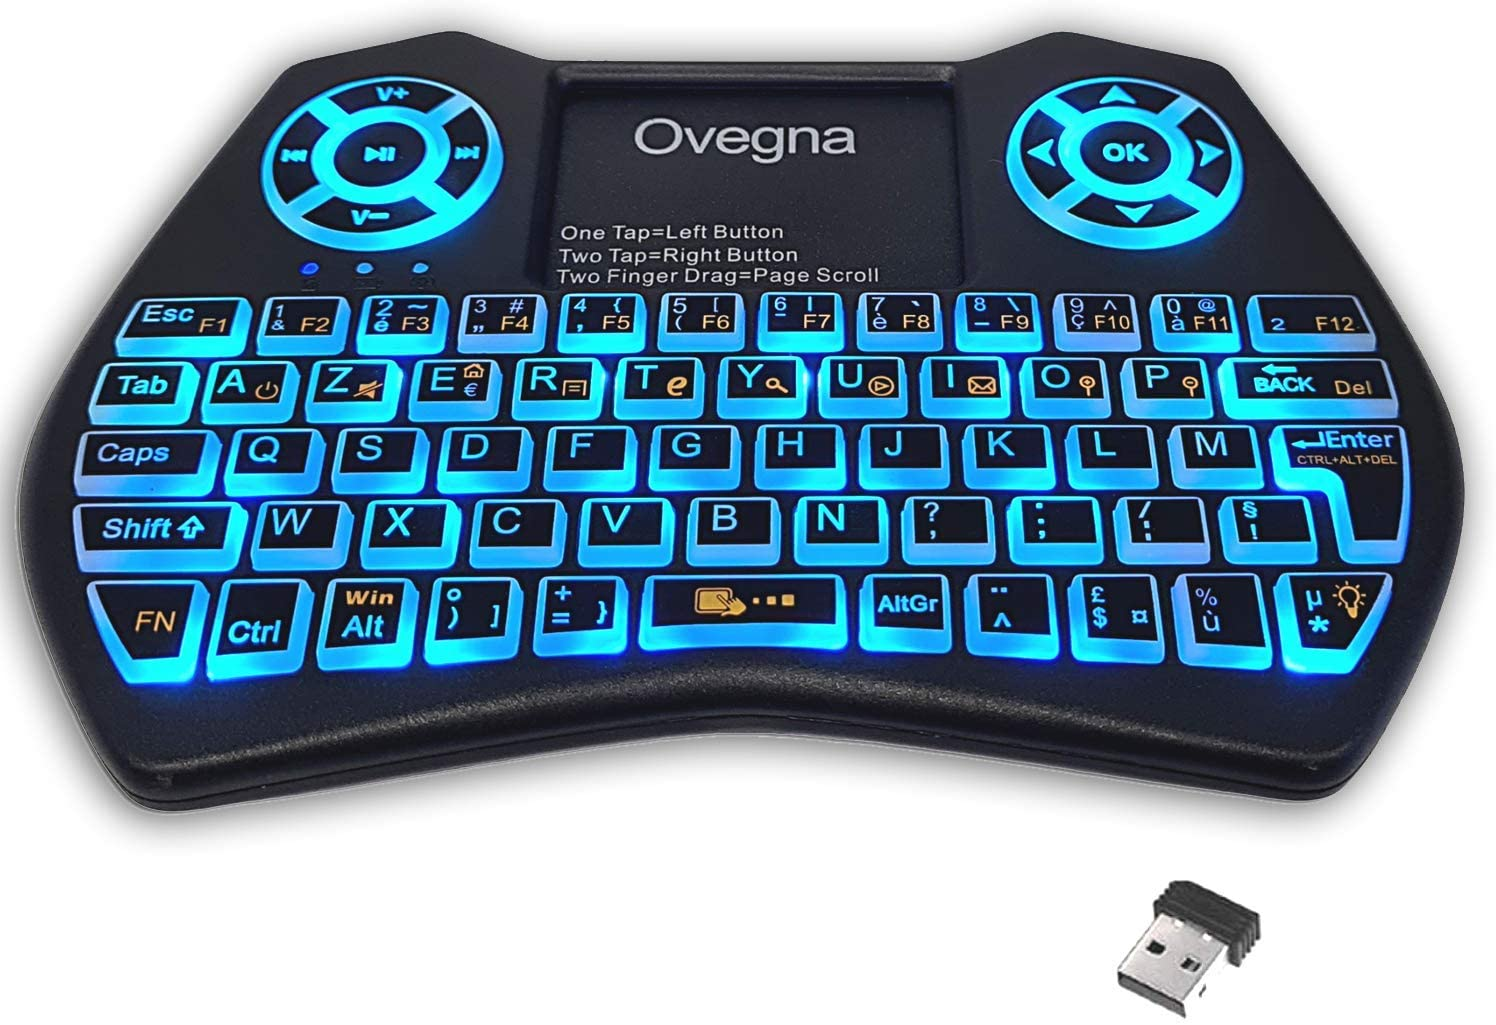 ovegna-i8-wireless-azerty-mini-wireless-ergonomic-keyboard-with-touchpad-for-smart-tv-android-mini-pc-htpc-consoles-computers--12